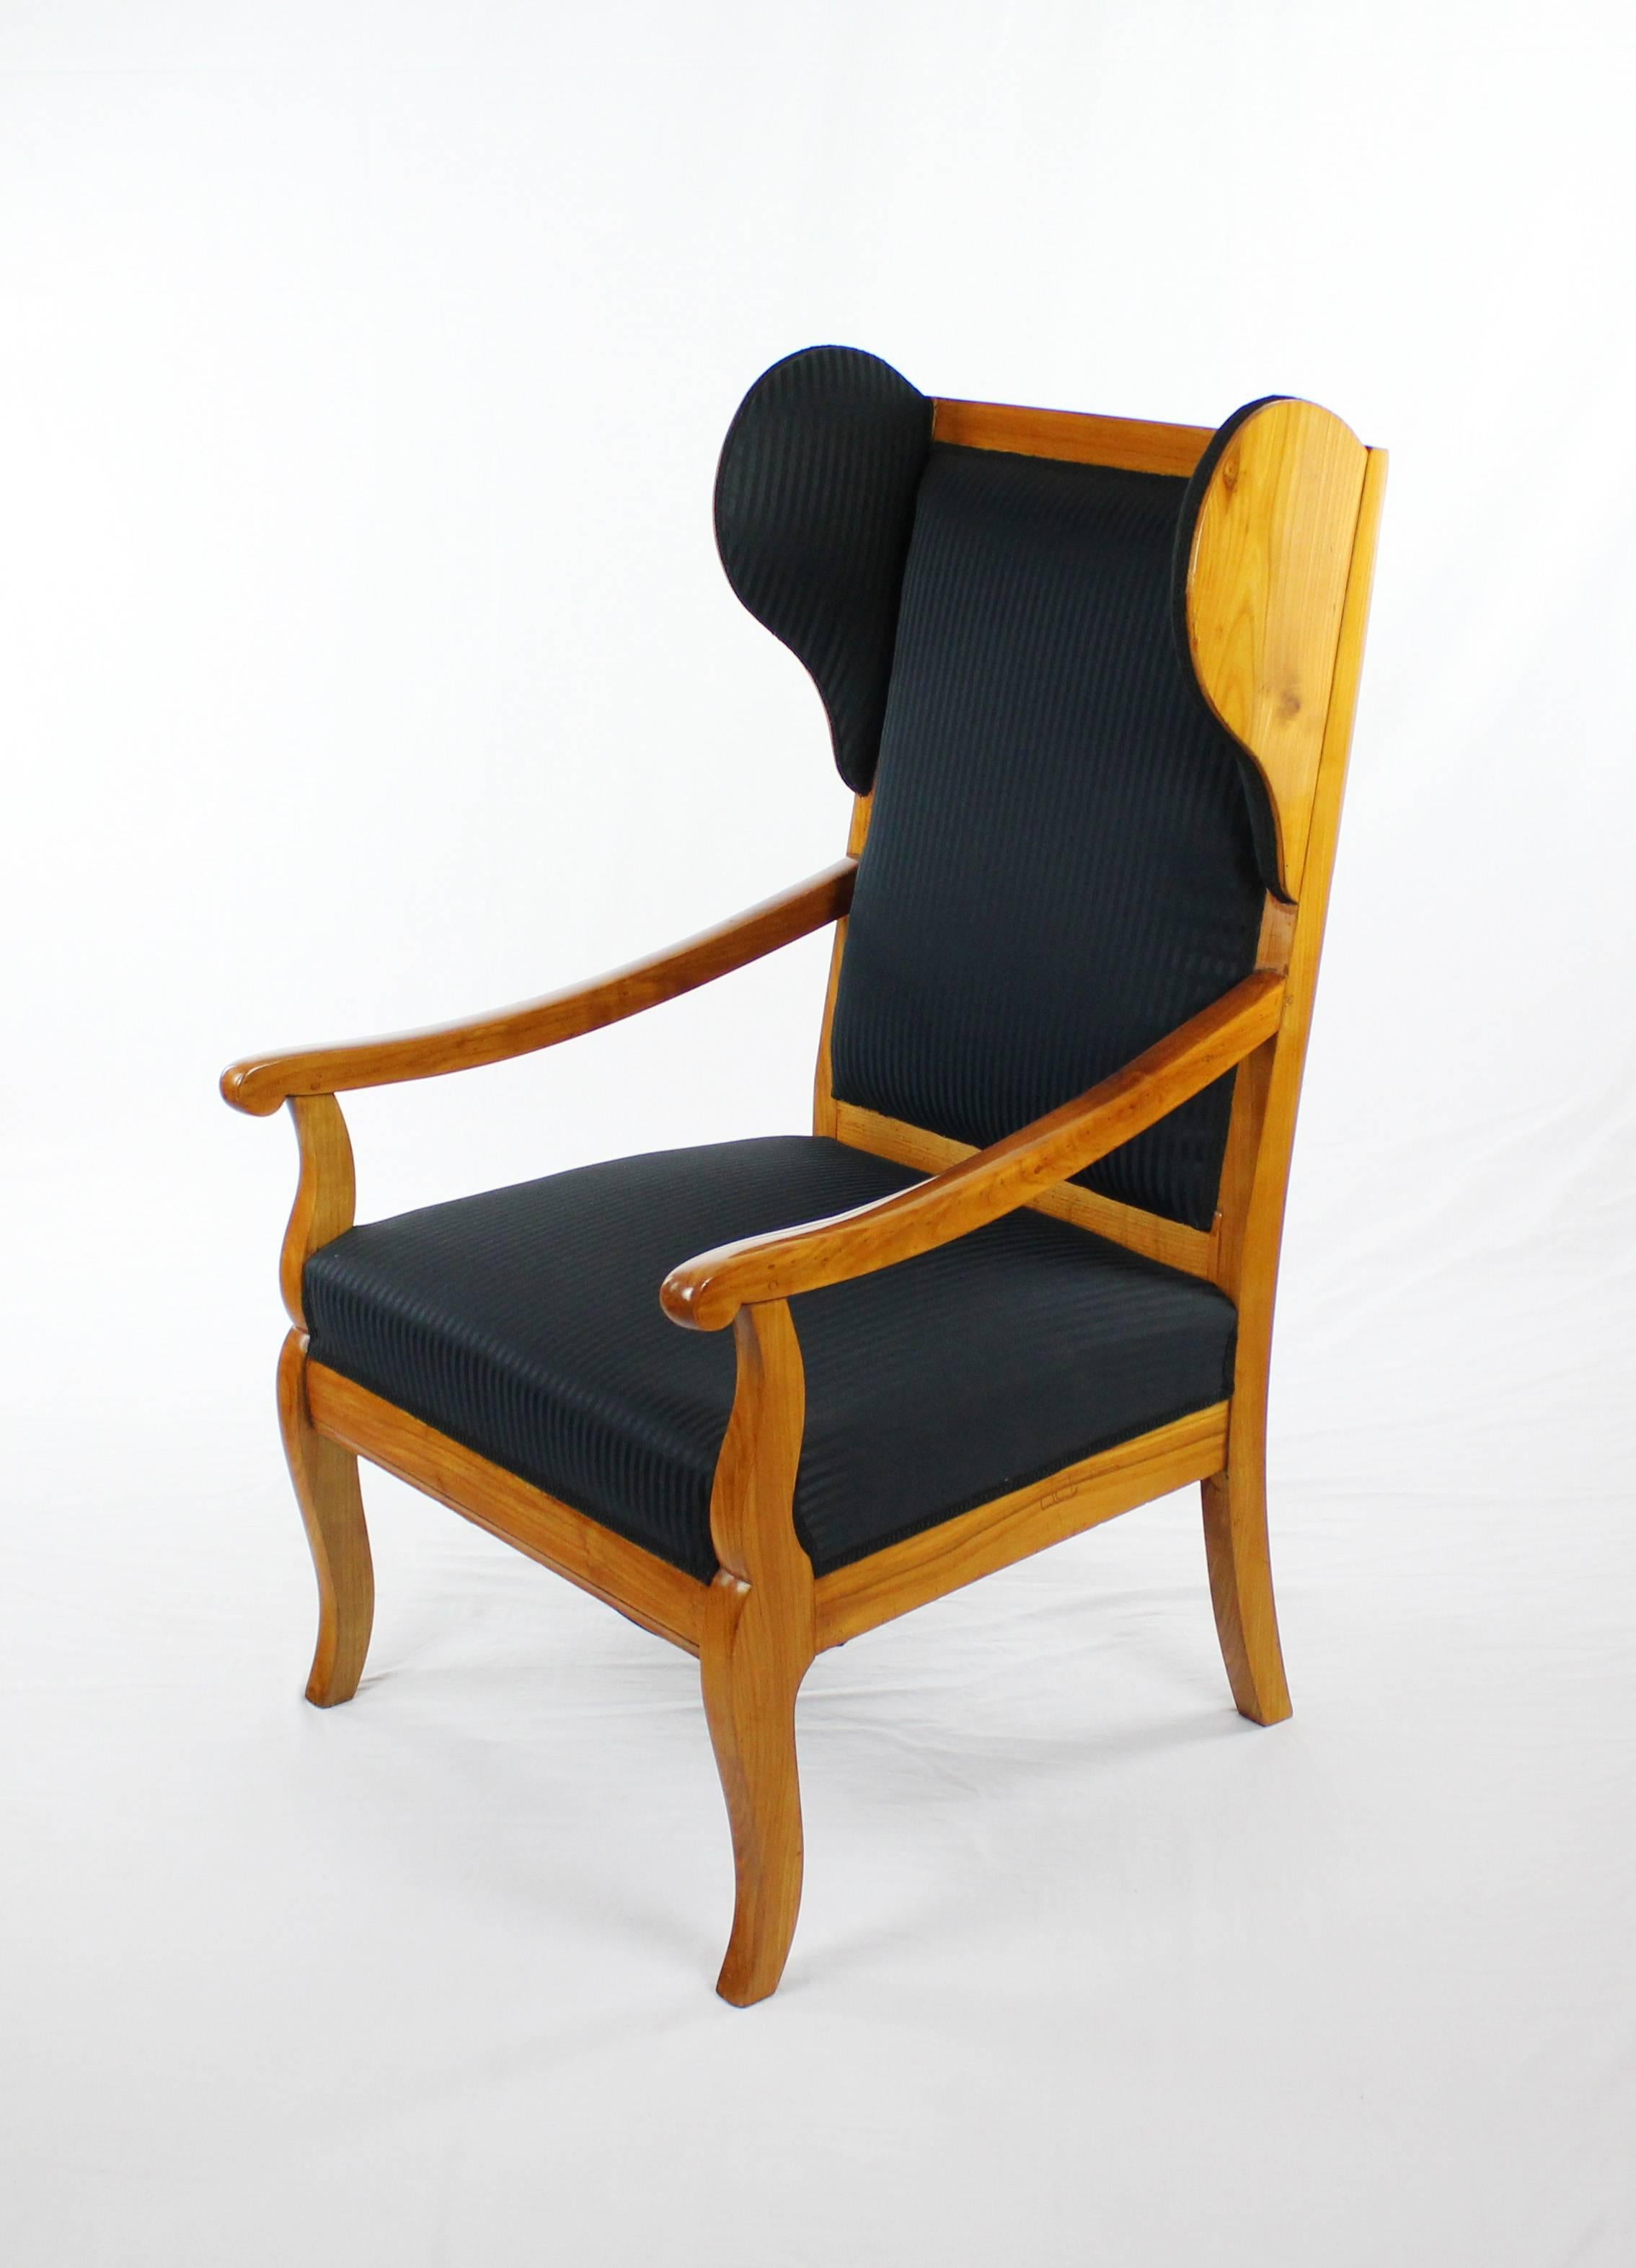 Ear forecastle armchair,
Biedermeier, circa 1830. 
Cherry tree.
Anew upholstered and referring, black seat cover.
Restored state.
Shellac polish.
measures: Height 116 cm, width 66 cm, depth 76 cm, seat height 45 cm.

I provide for packing of the